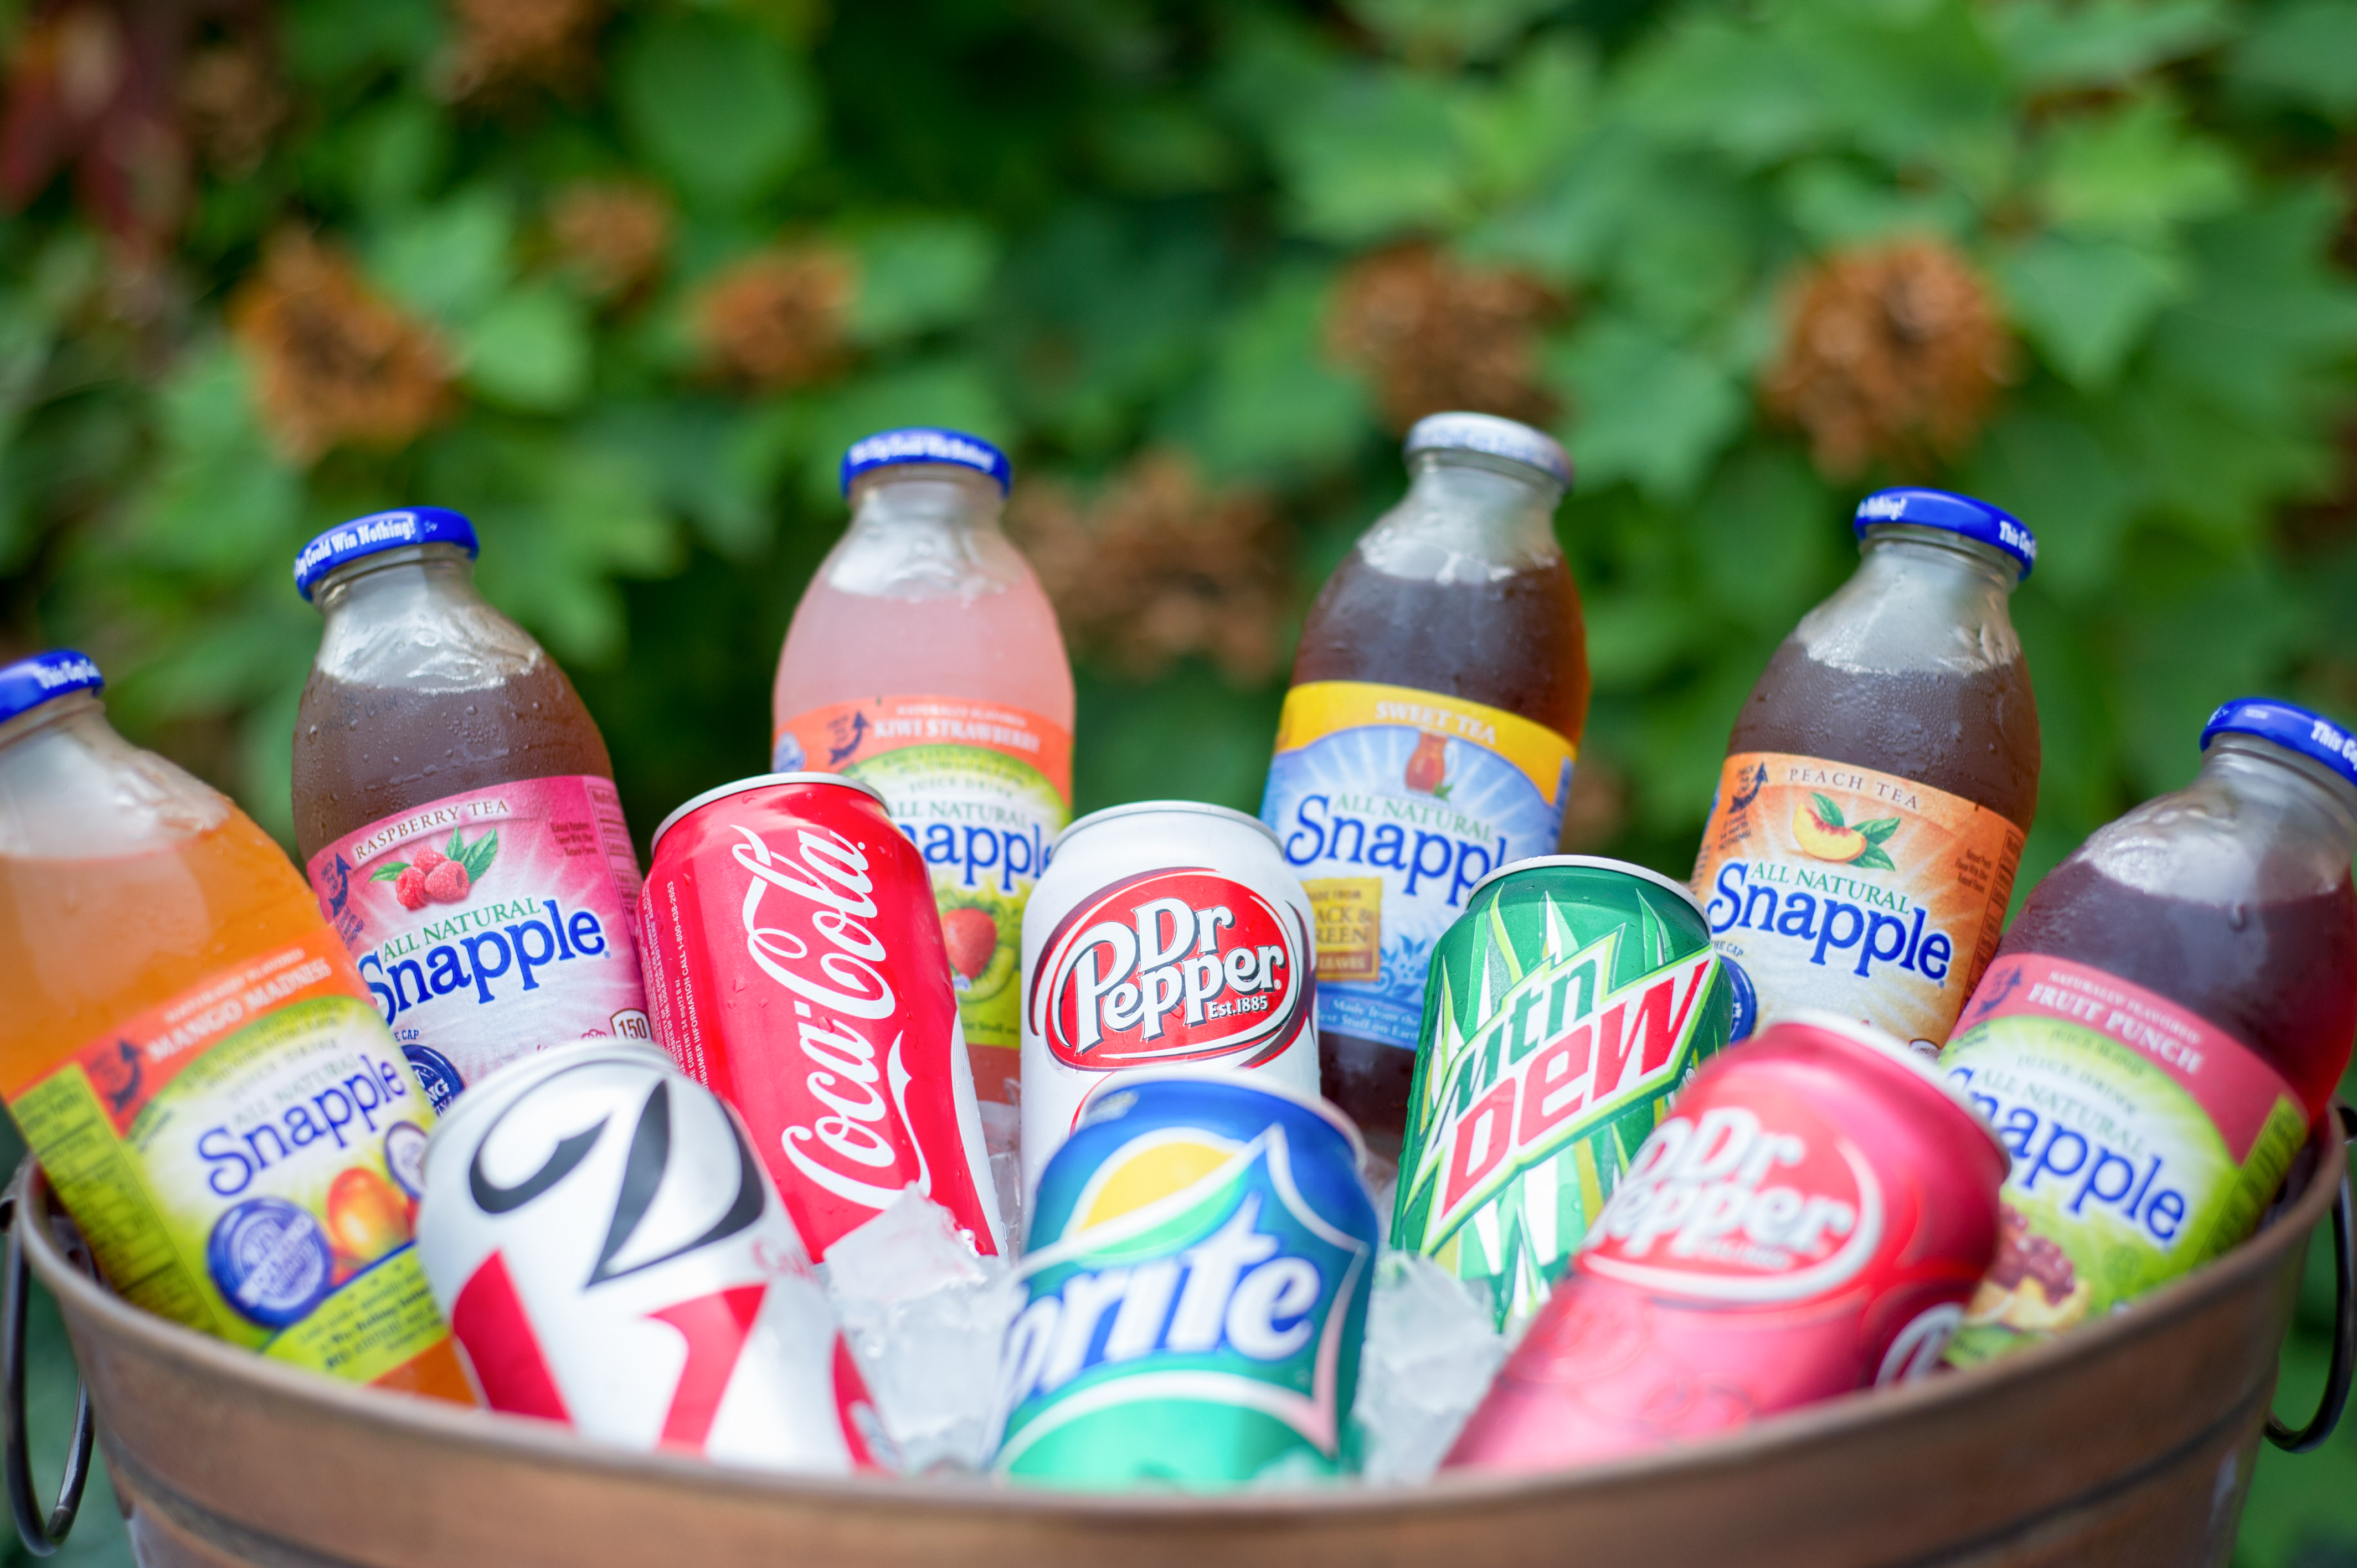 assorted bottles of snapple drink displayed in a bucket of ice